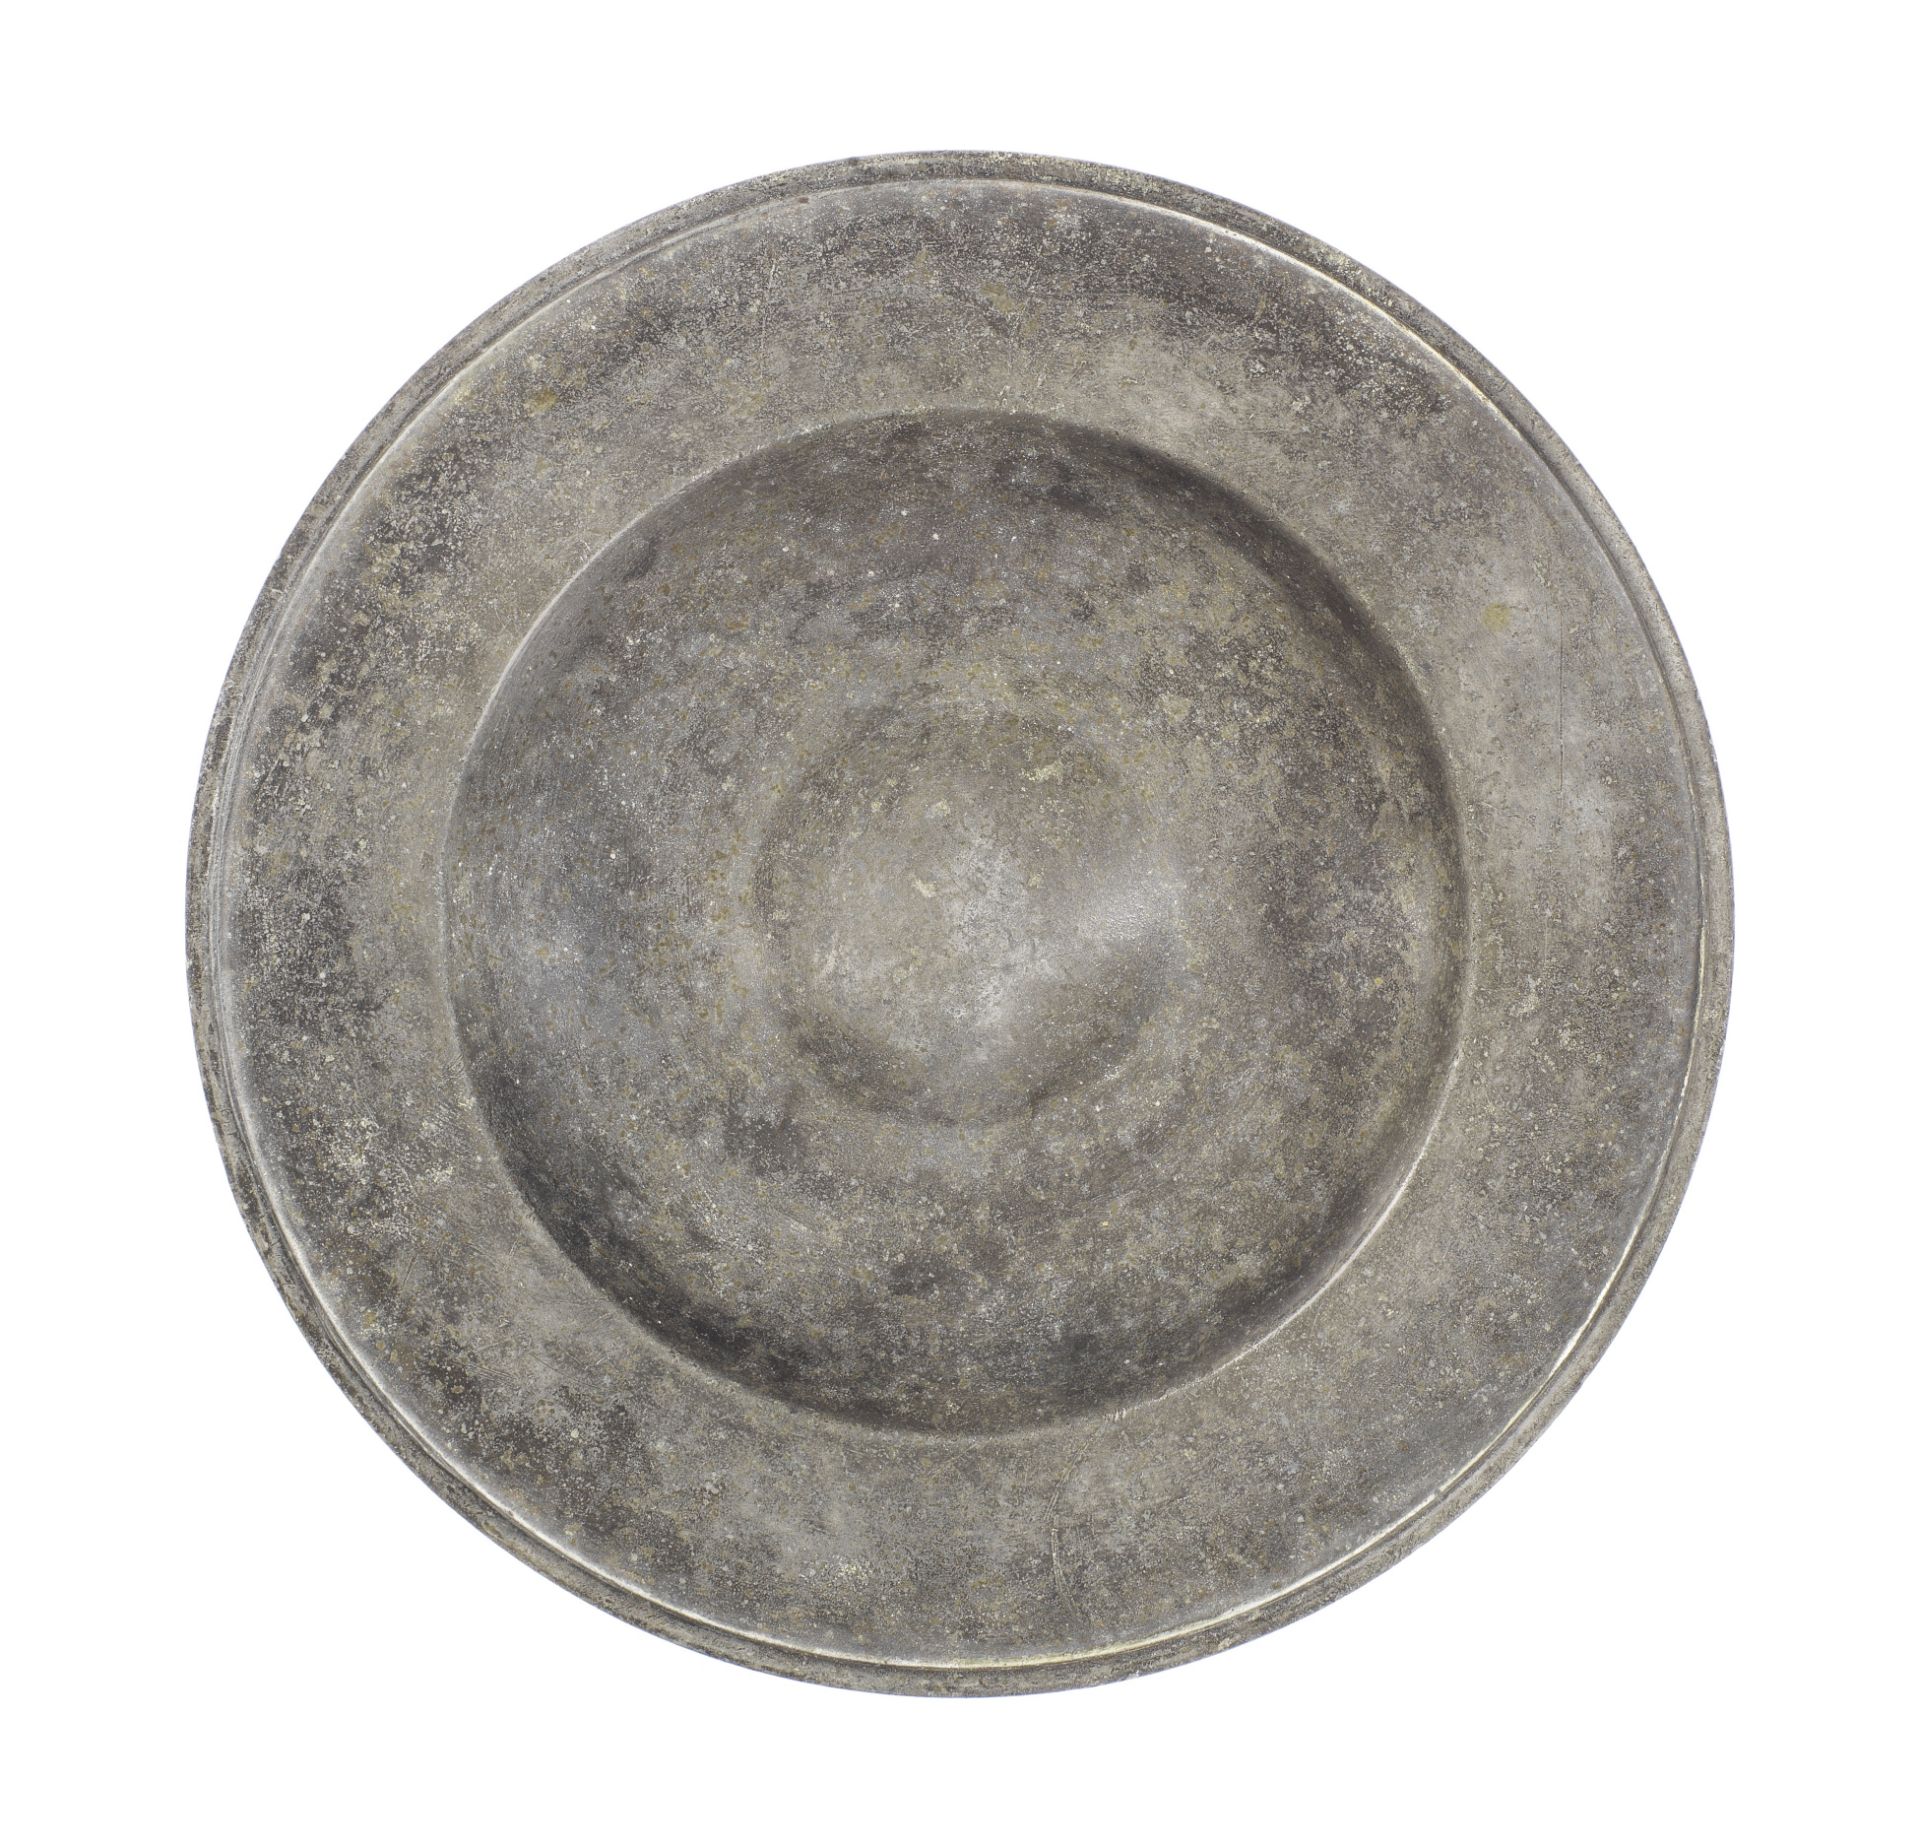 A good pewter bossed saucer, circa 1600